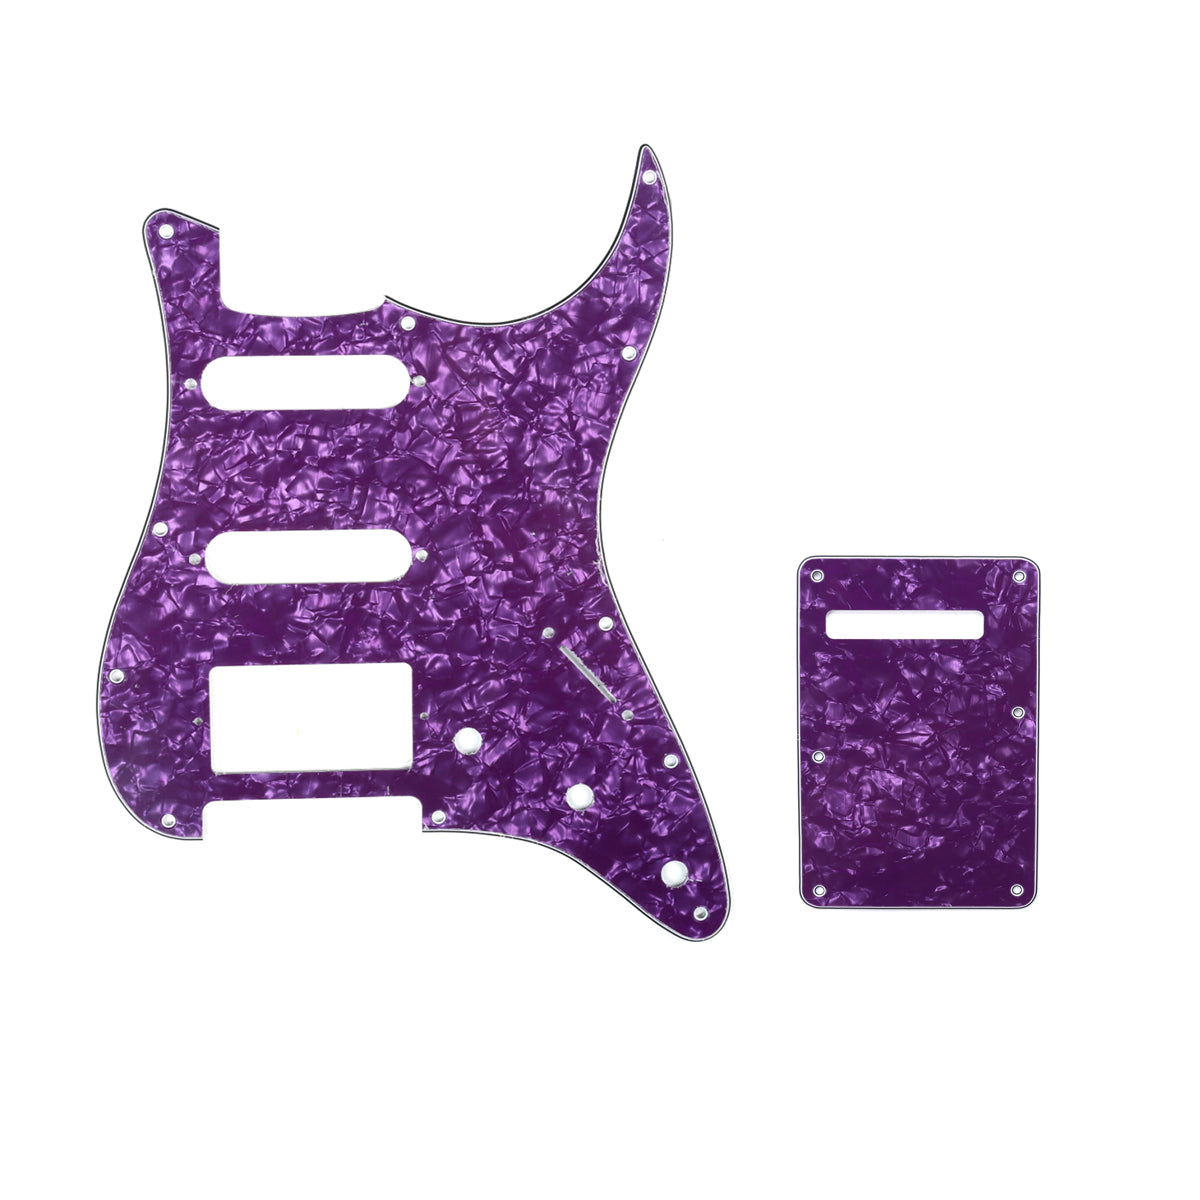 Musiclily SSH 11 Hole Strat Guitar Pickguard and BackPlate Set for Fender USA/Mexican Standard Stratocaster Modern Style, 4Ply Purple Pearl